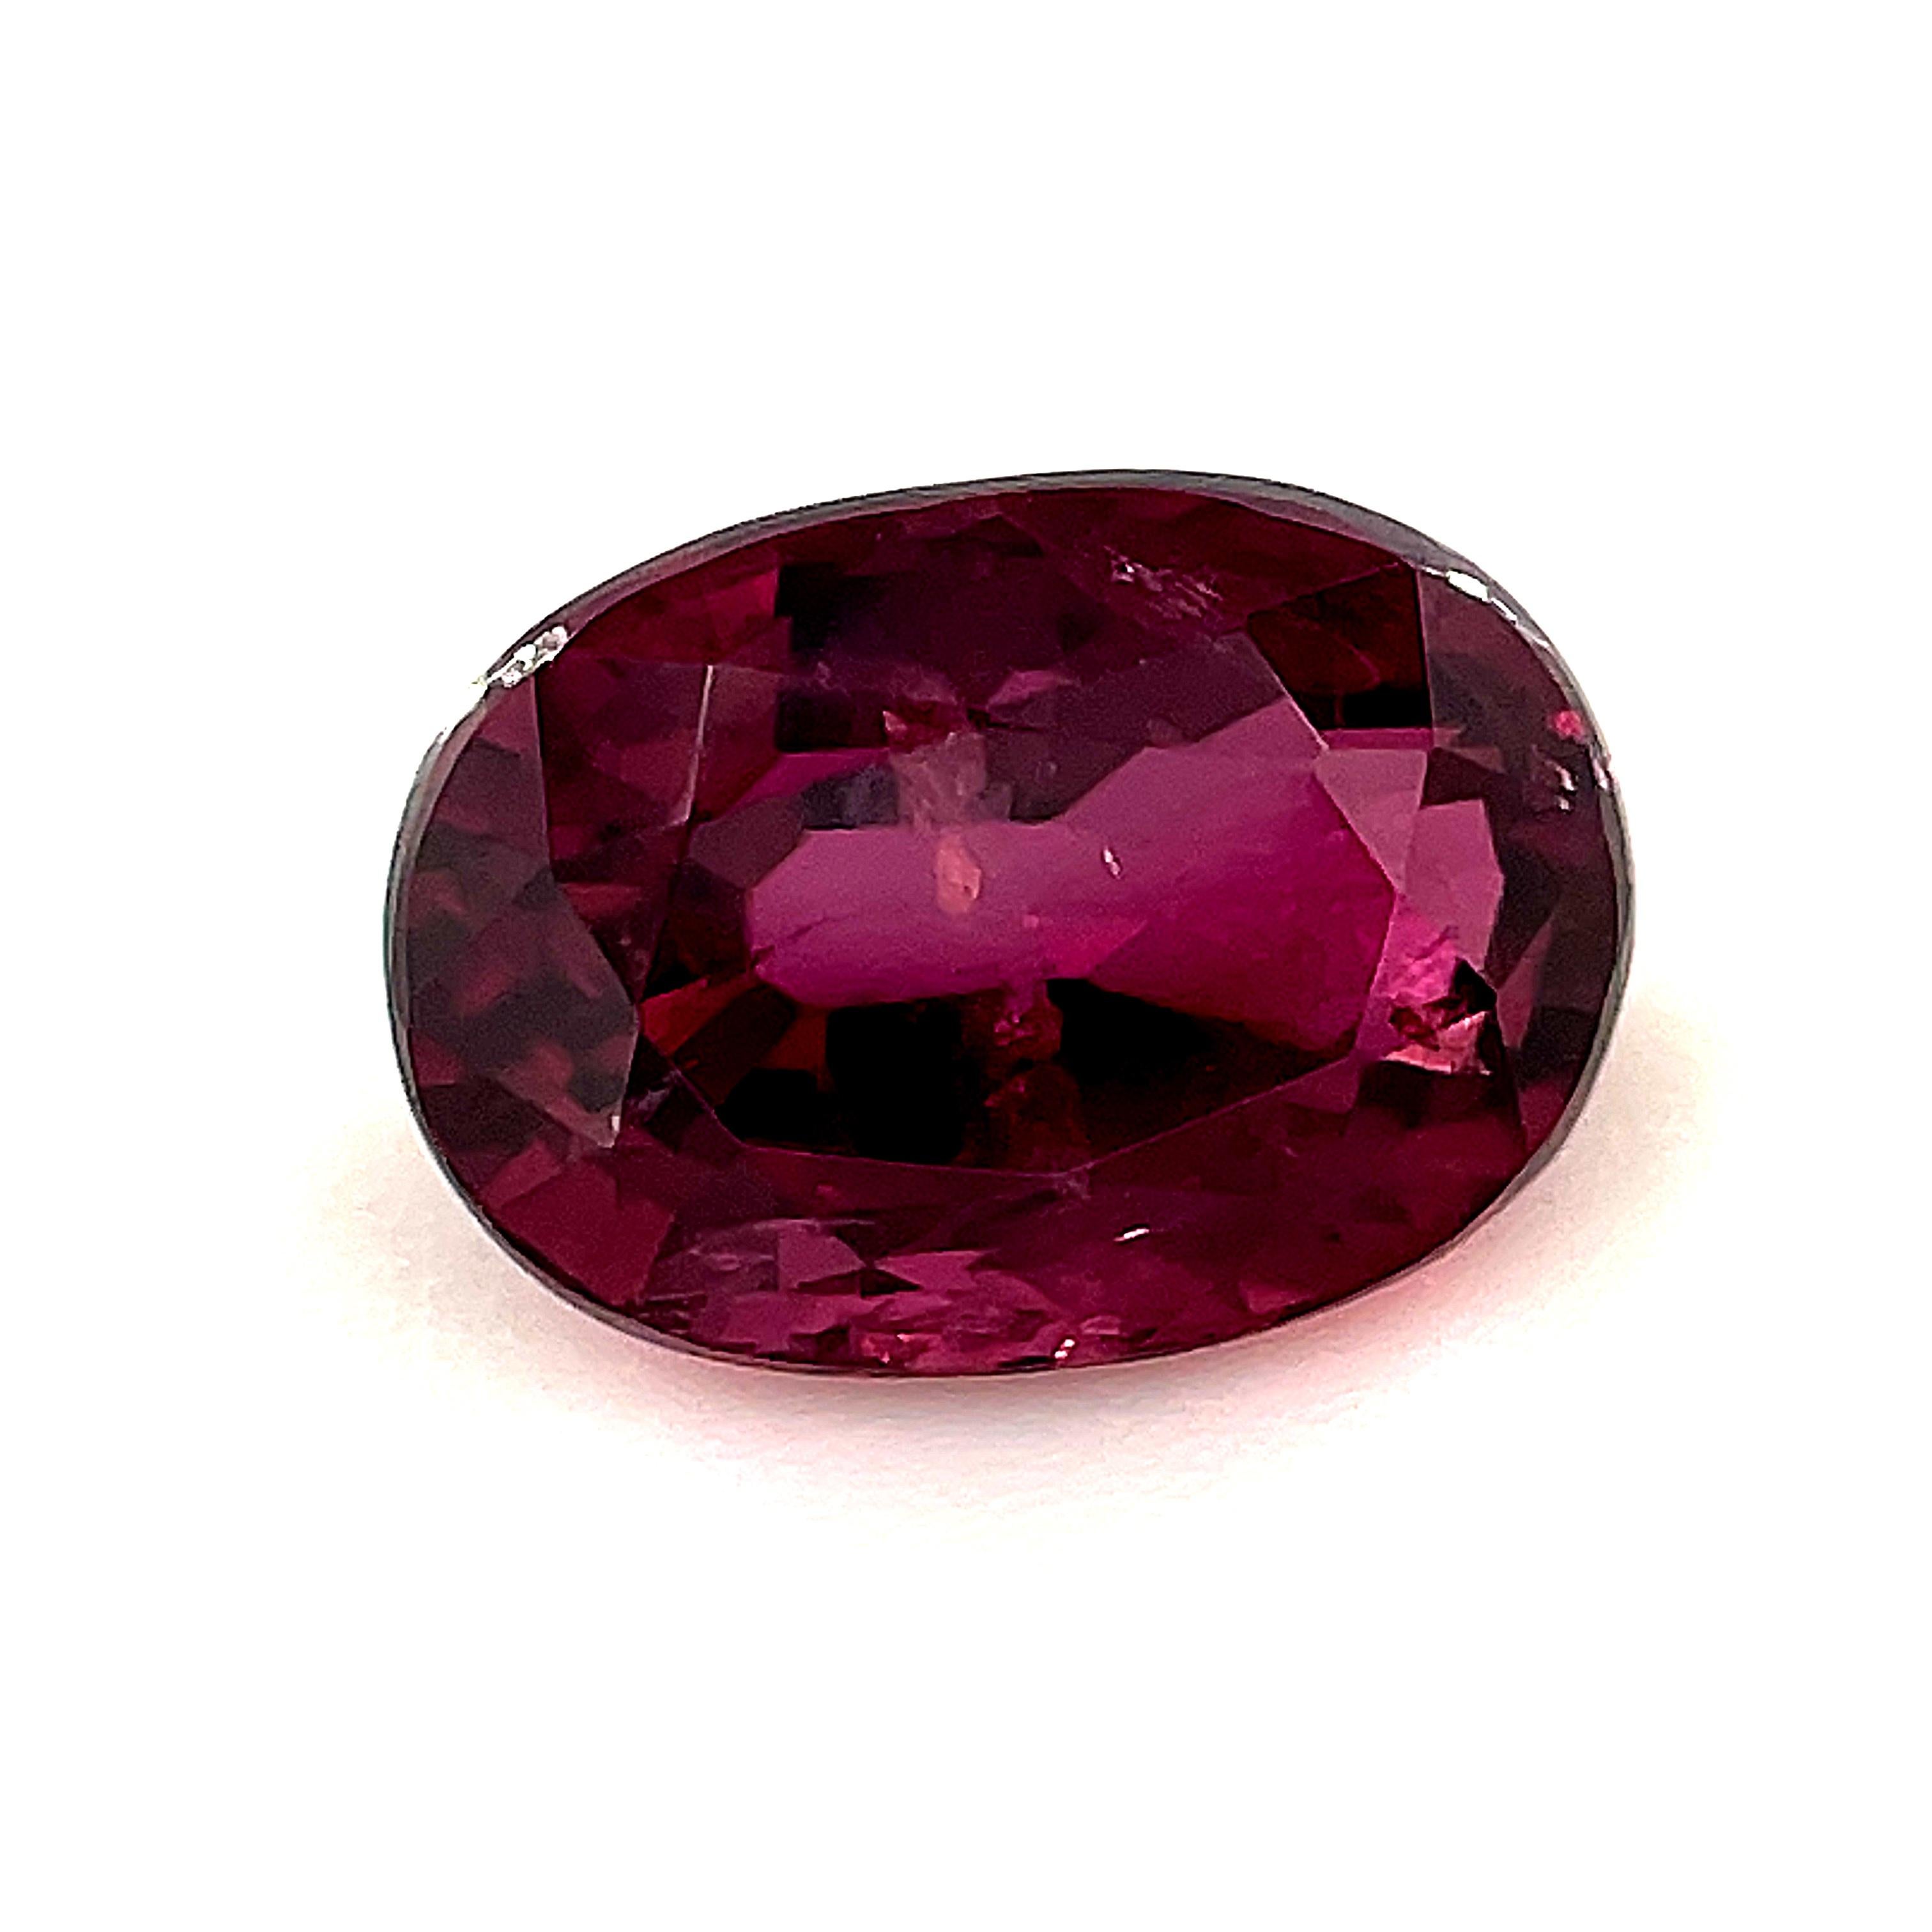 Oval Cut 1.24 Carat Oval Loose Unset Ruby Gemstone For Sale